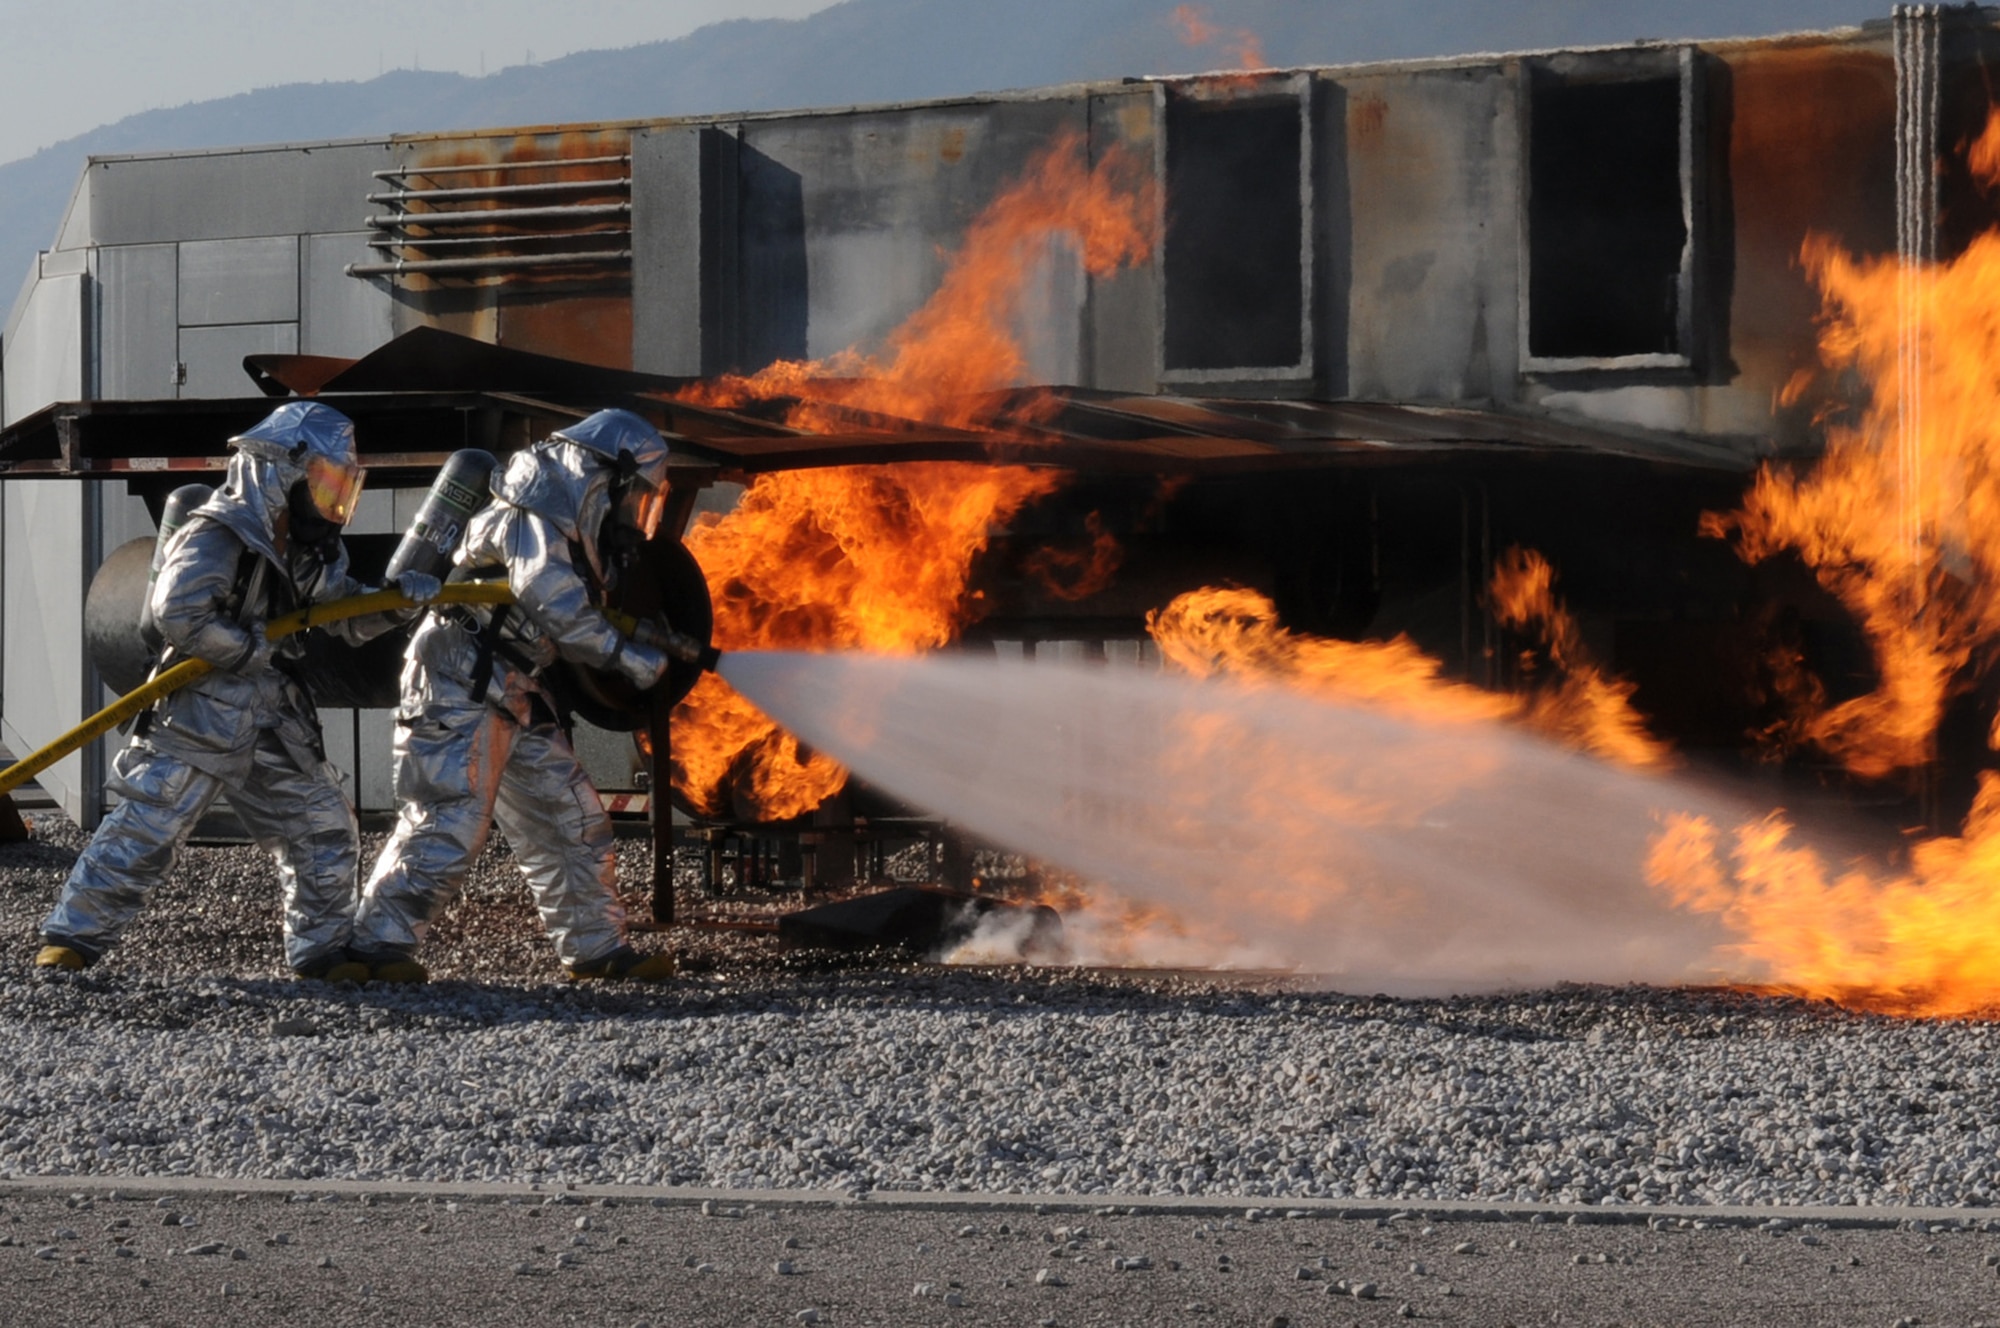 Firefighters assigned to the 31st Civil Engineer Squadron extinguish flames during a simulated aircraft accident during a training exercise Nov. 11, 2009 at Aviano Air Base, Italy.  The 31st CES fire department conducted a three-day training course with four Italian Air Force firefighters from Decimomannu Air Base, Sardinia, Italy.  The course consisted of hydrazine, F-16 aircraft emergency response procedures and pilot egress, structural fire fighting tactics and strategy.

(U.S. Air Force photo/ Senior Airman Nadine Y. Barclay)